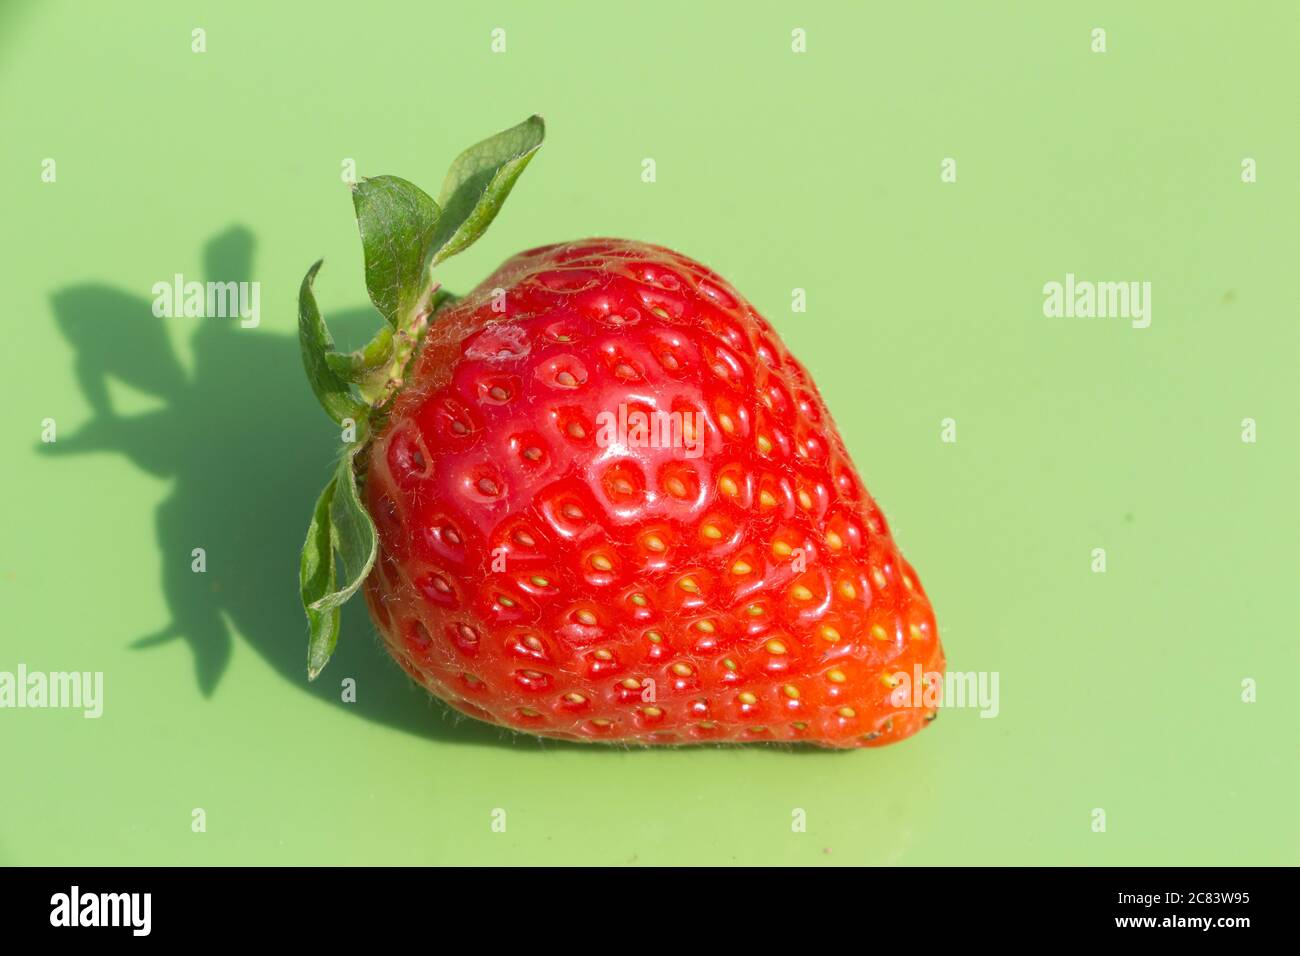 Strawberry on green background after harvesting in a vegetable garden Stock Photo